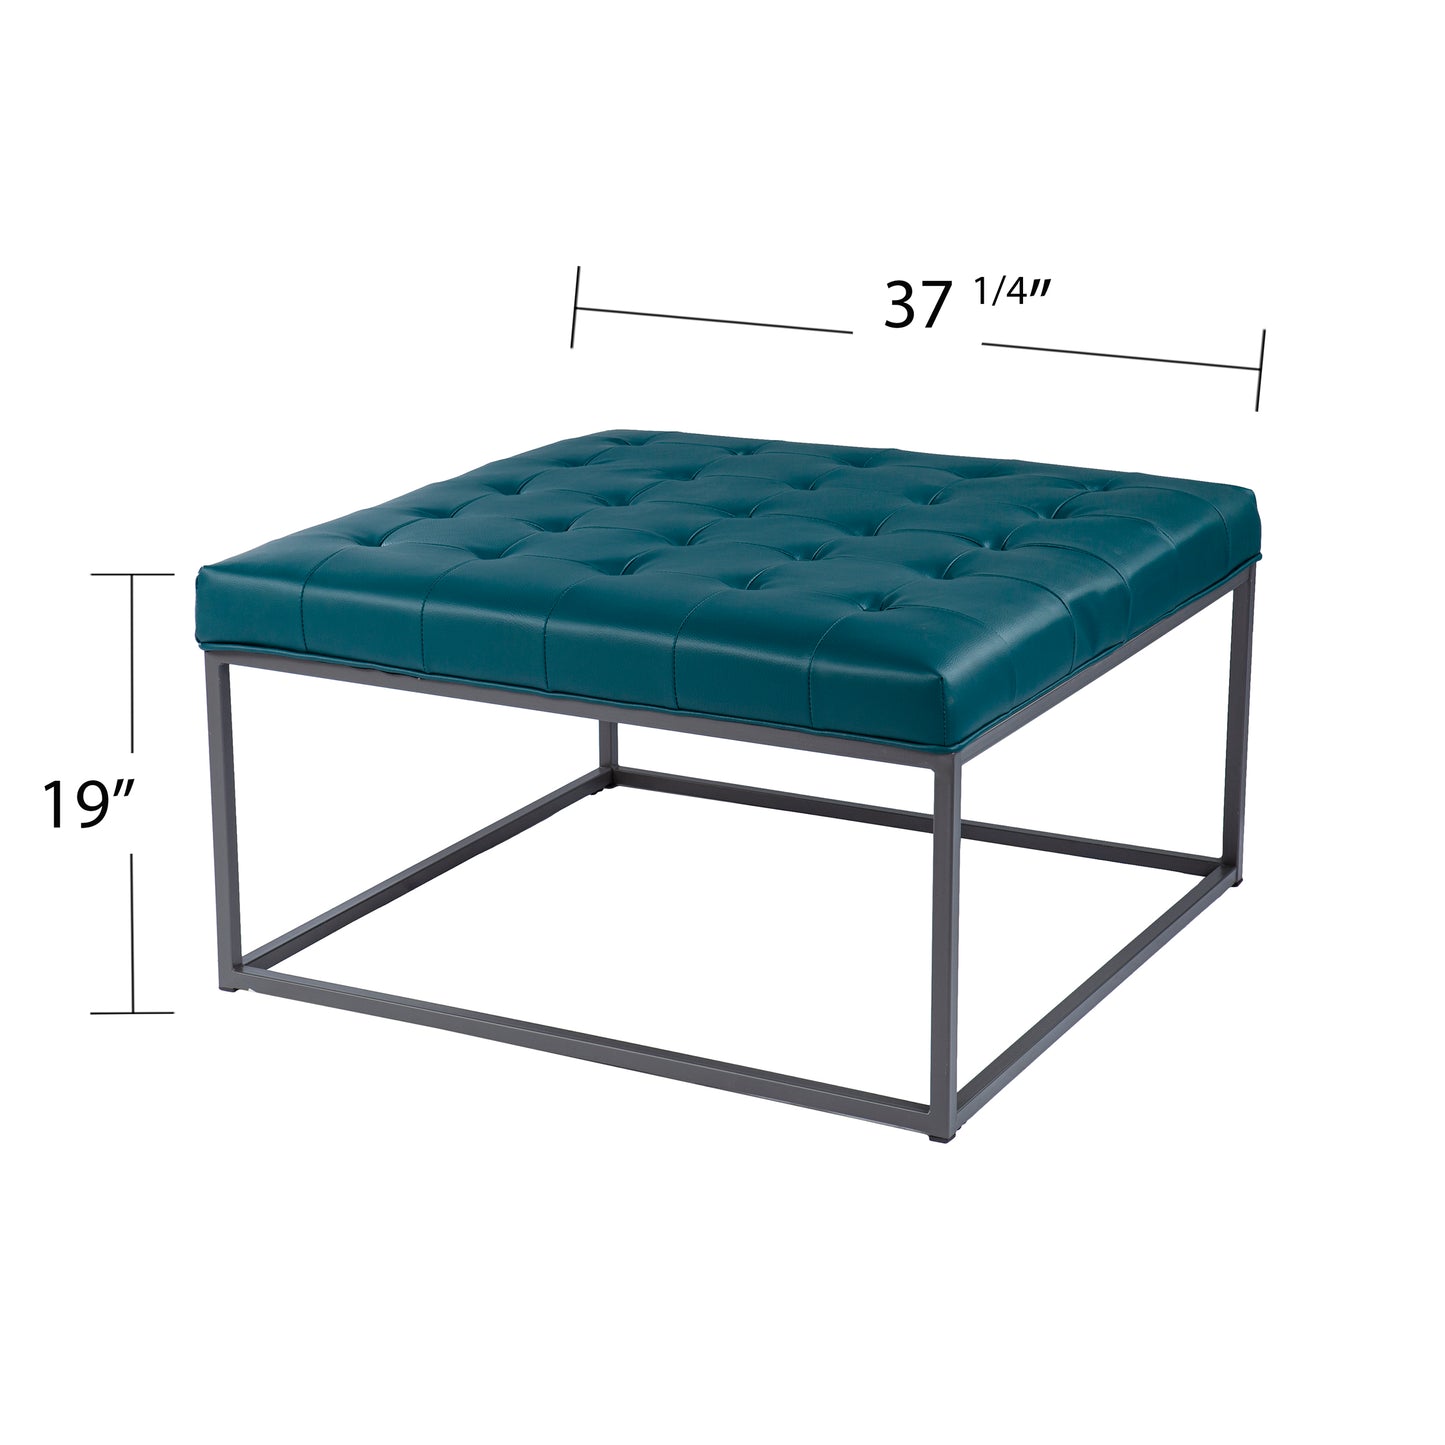 Ciarin Upholstered Cocktail Ottoman - Blue